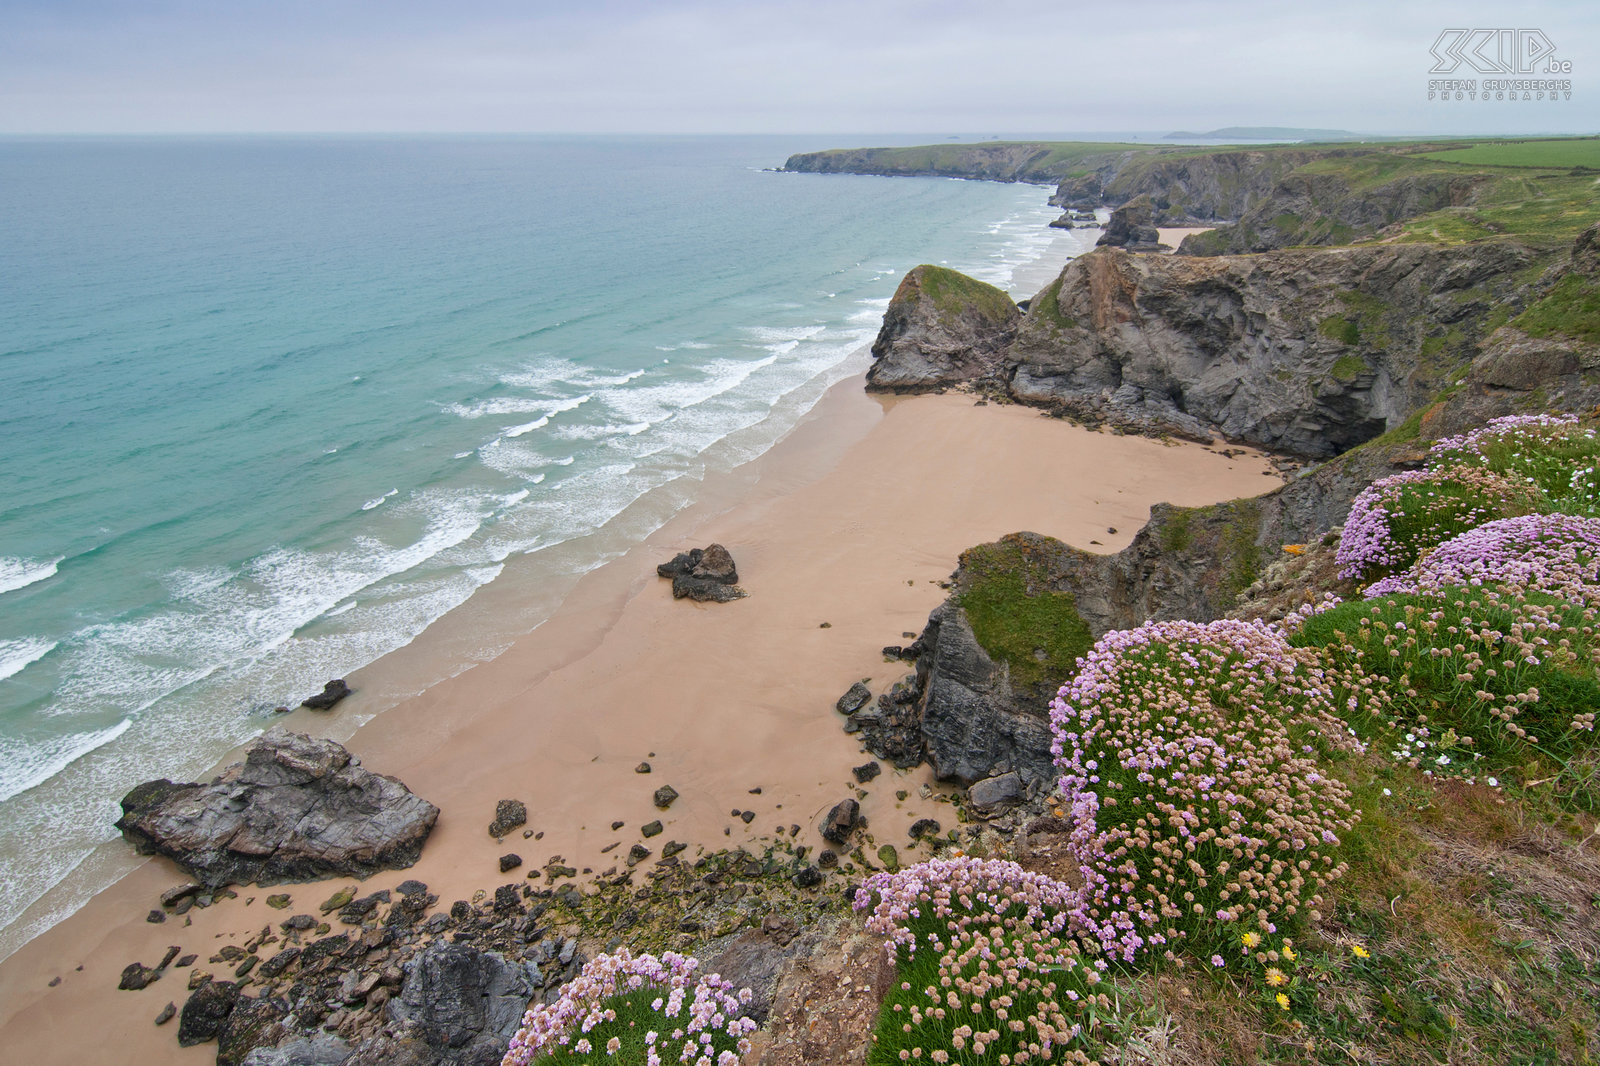 Bedruthan Steps One of the most spectacular views at the Cornish coast are the cliffs and beaches of Bedruthan Steps which are located between Padstow and Newquay. Stefan Cruysberghs